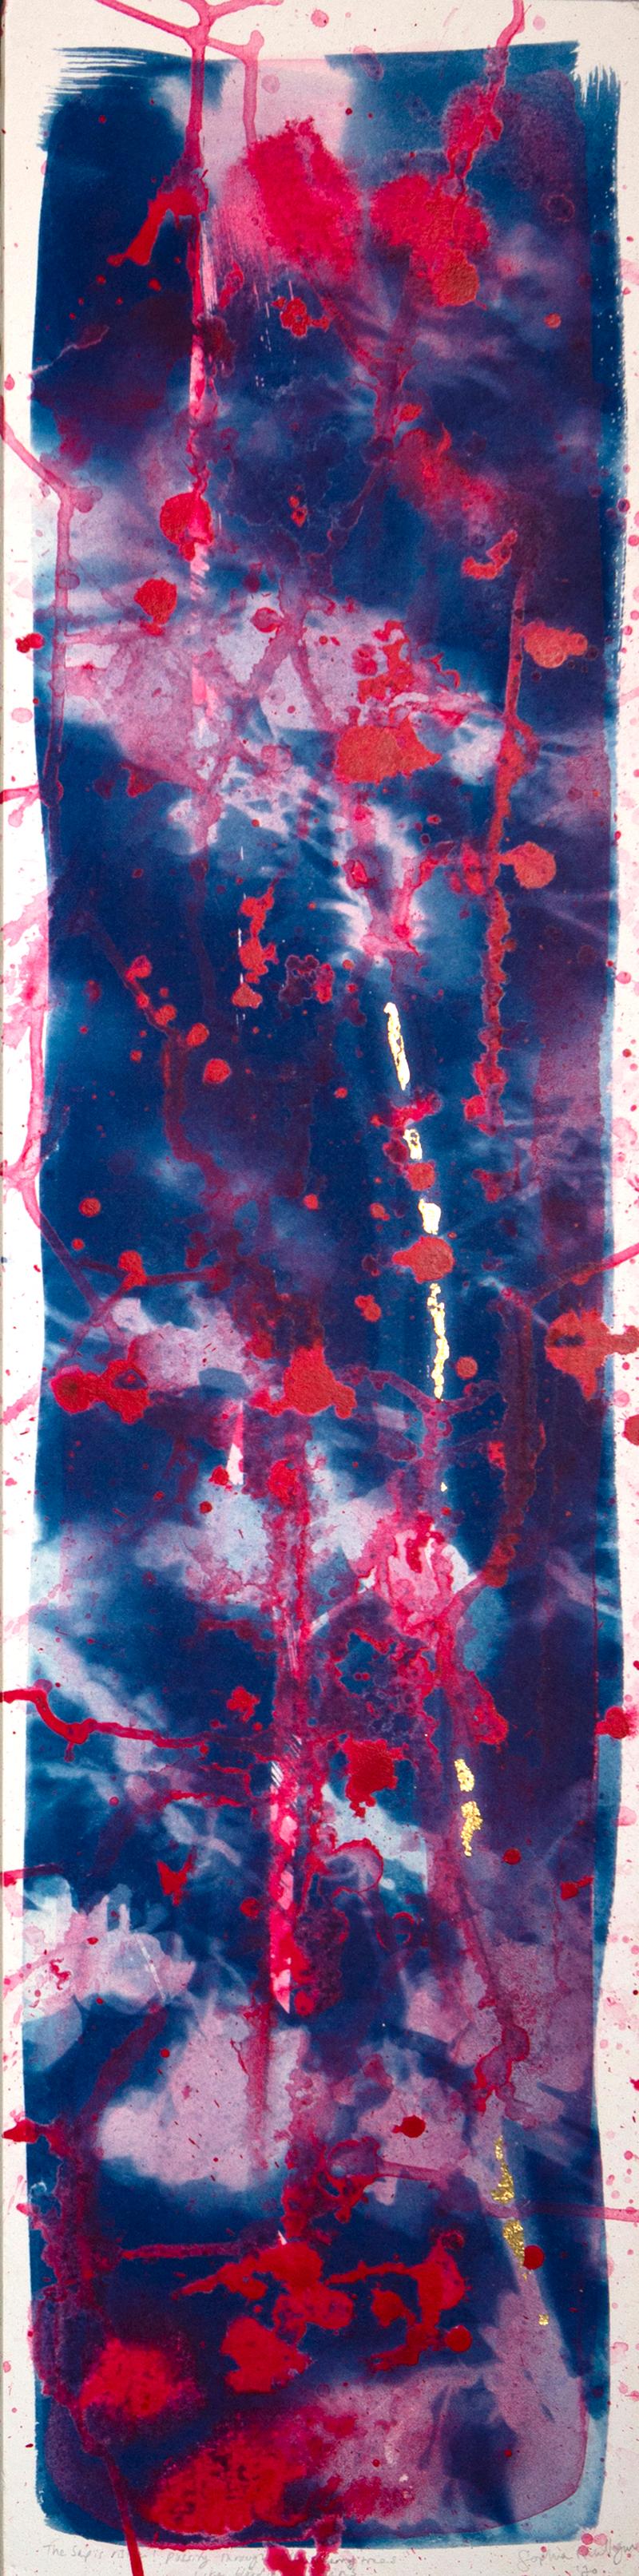 Sophia Milligan Abstract Drawing - 'Blood in the Veins'. Cherry blossom pink white blue magenta abstract sakura